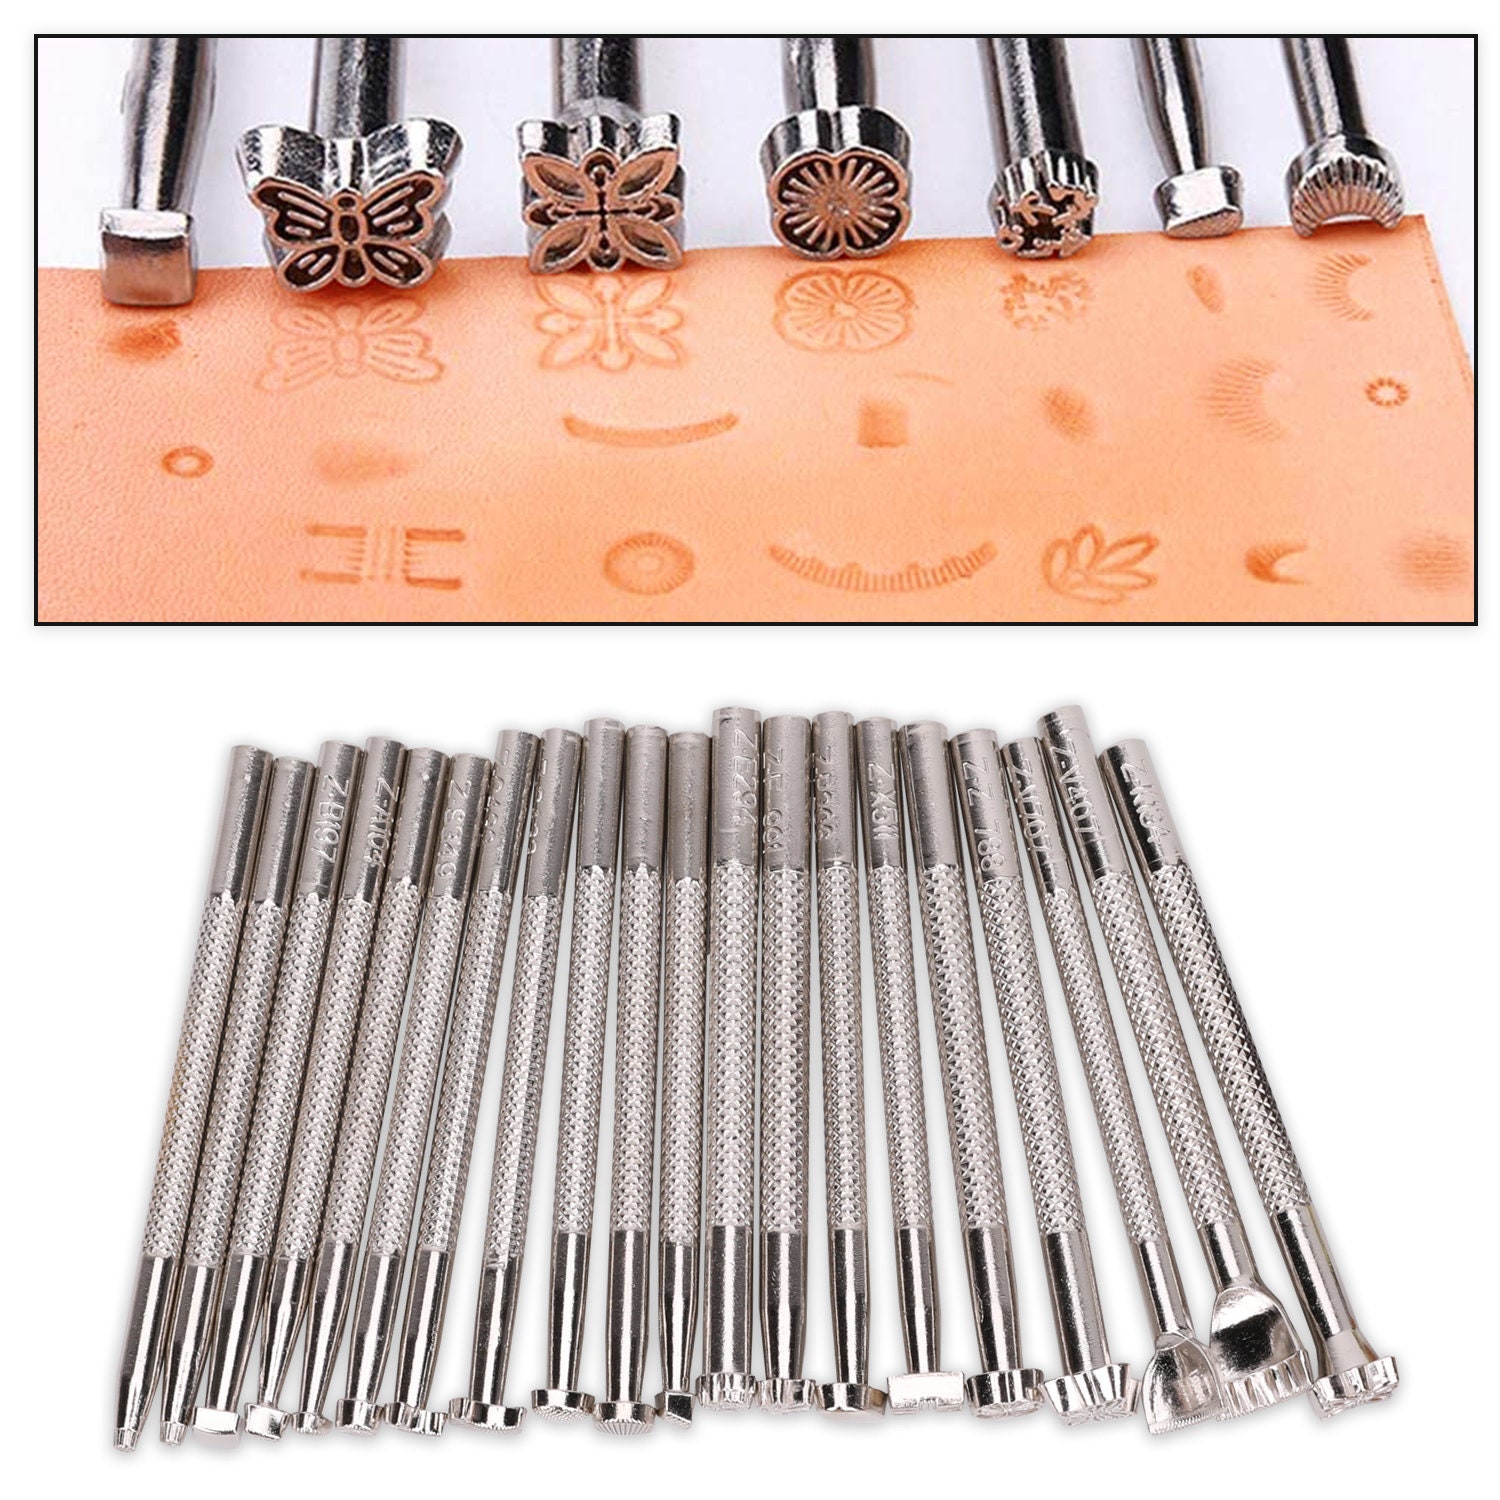 Wholesale BENECREAT DIY Stainless Steel Leather Sewing Craft Tools